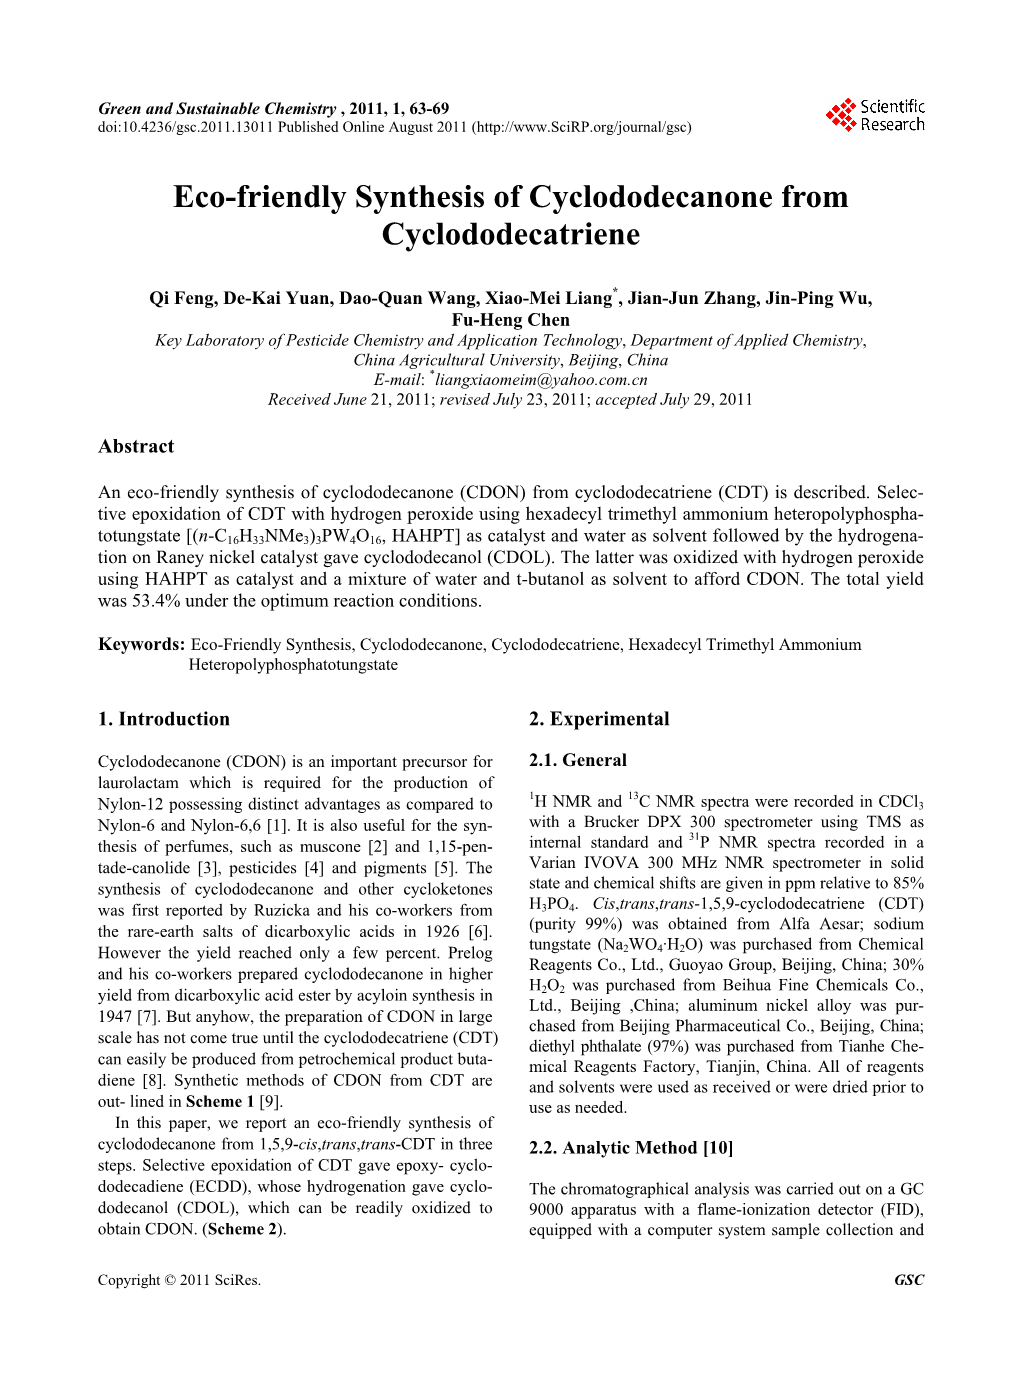 Eco-Friendly Synthesis of Cyclododecanone from Cyclododecatriene